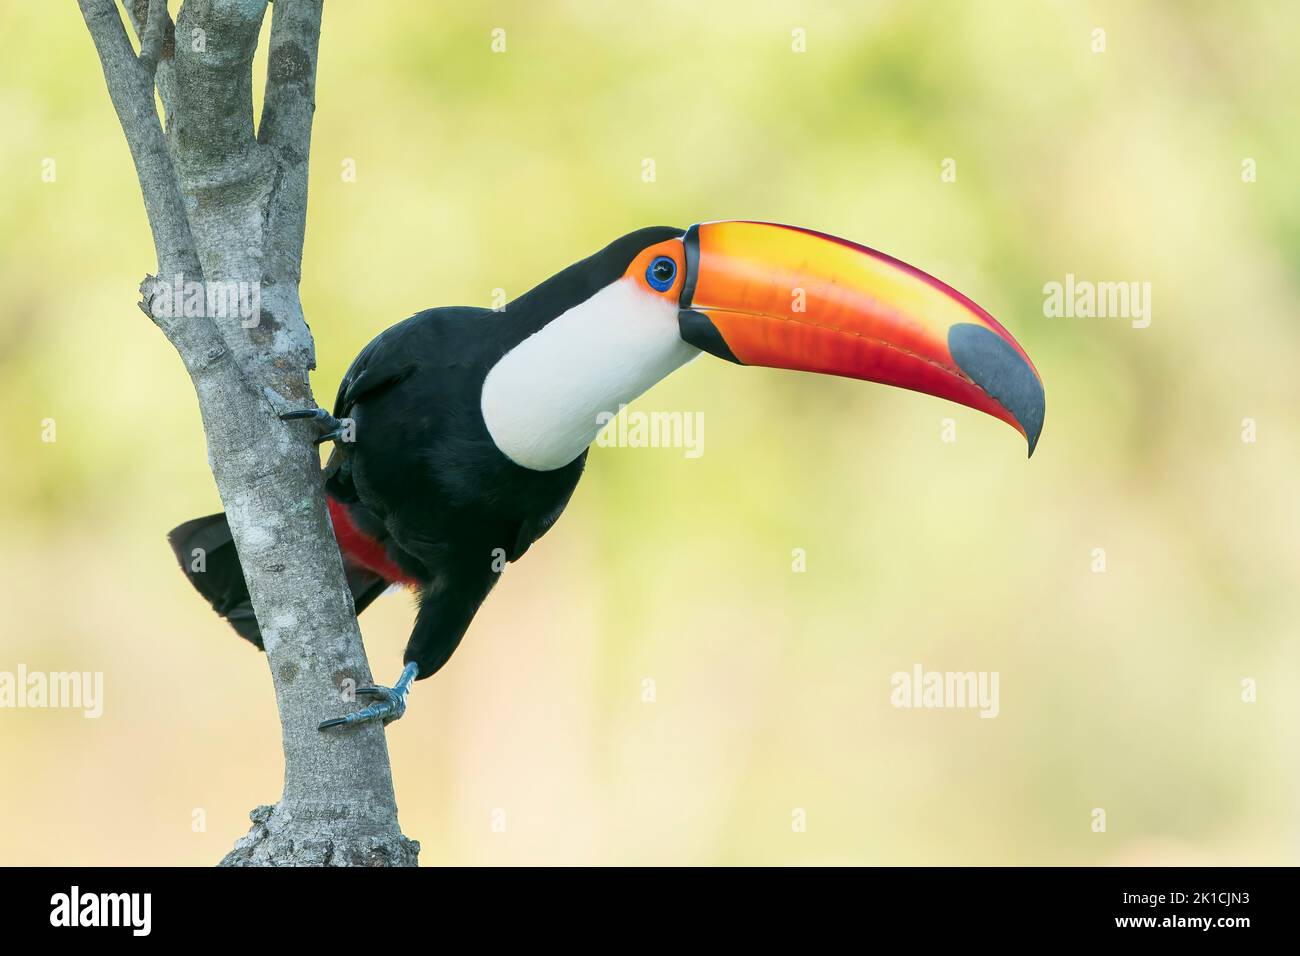 toco toucan, Ramphastos toco, single adult perched in tree, Pantanal, Brazil Stock Photo